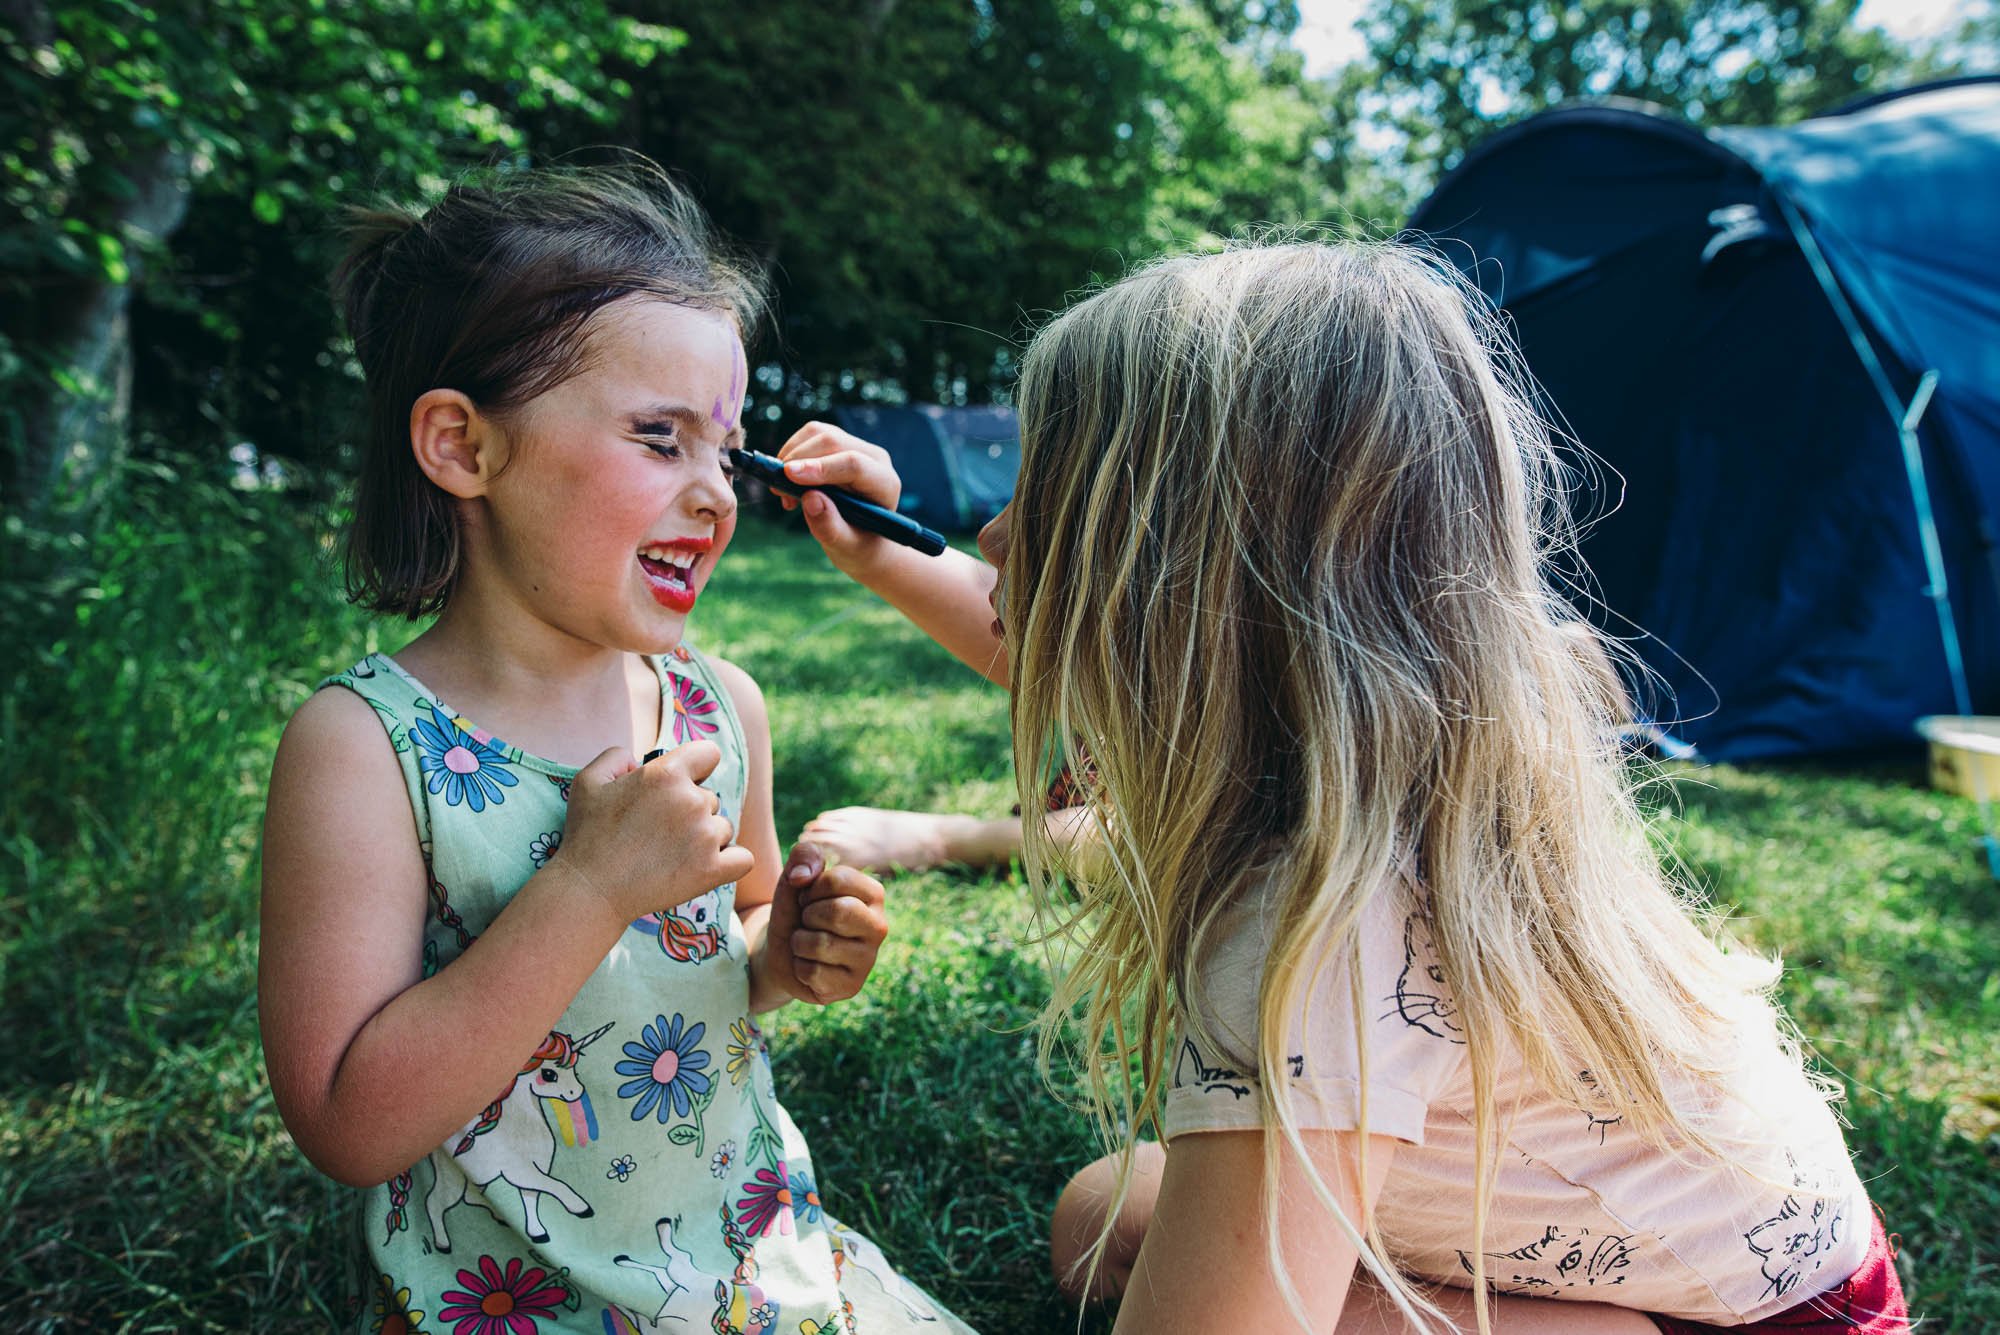 girls-face-paint-natural-unposed-family-photography-family-photographer-brighton-sussex-hove-worthing.jpg